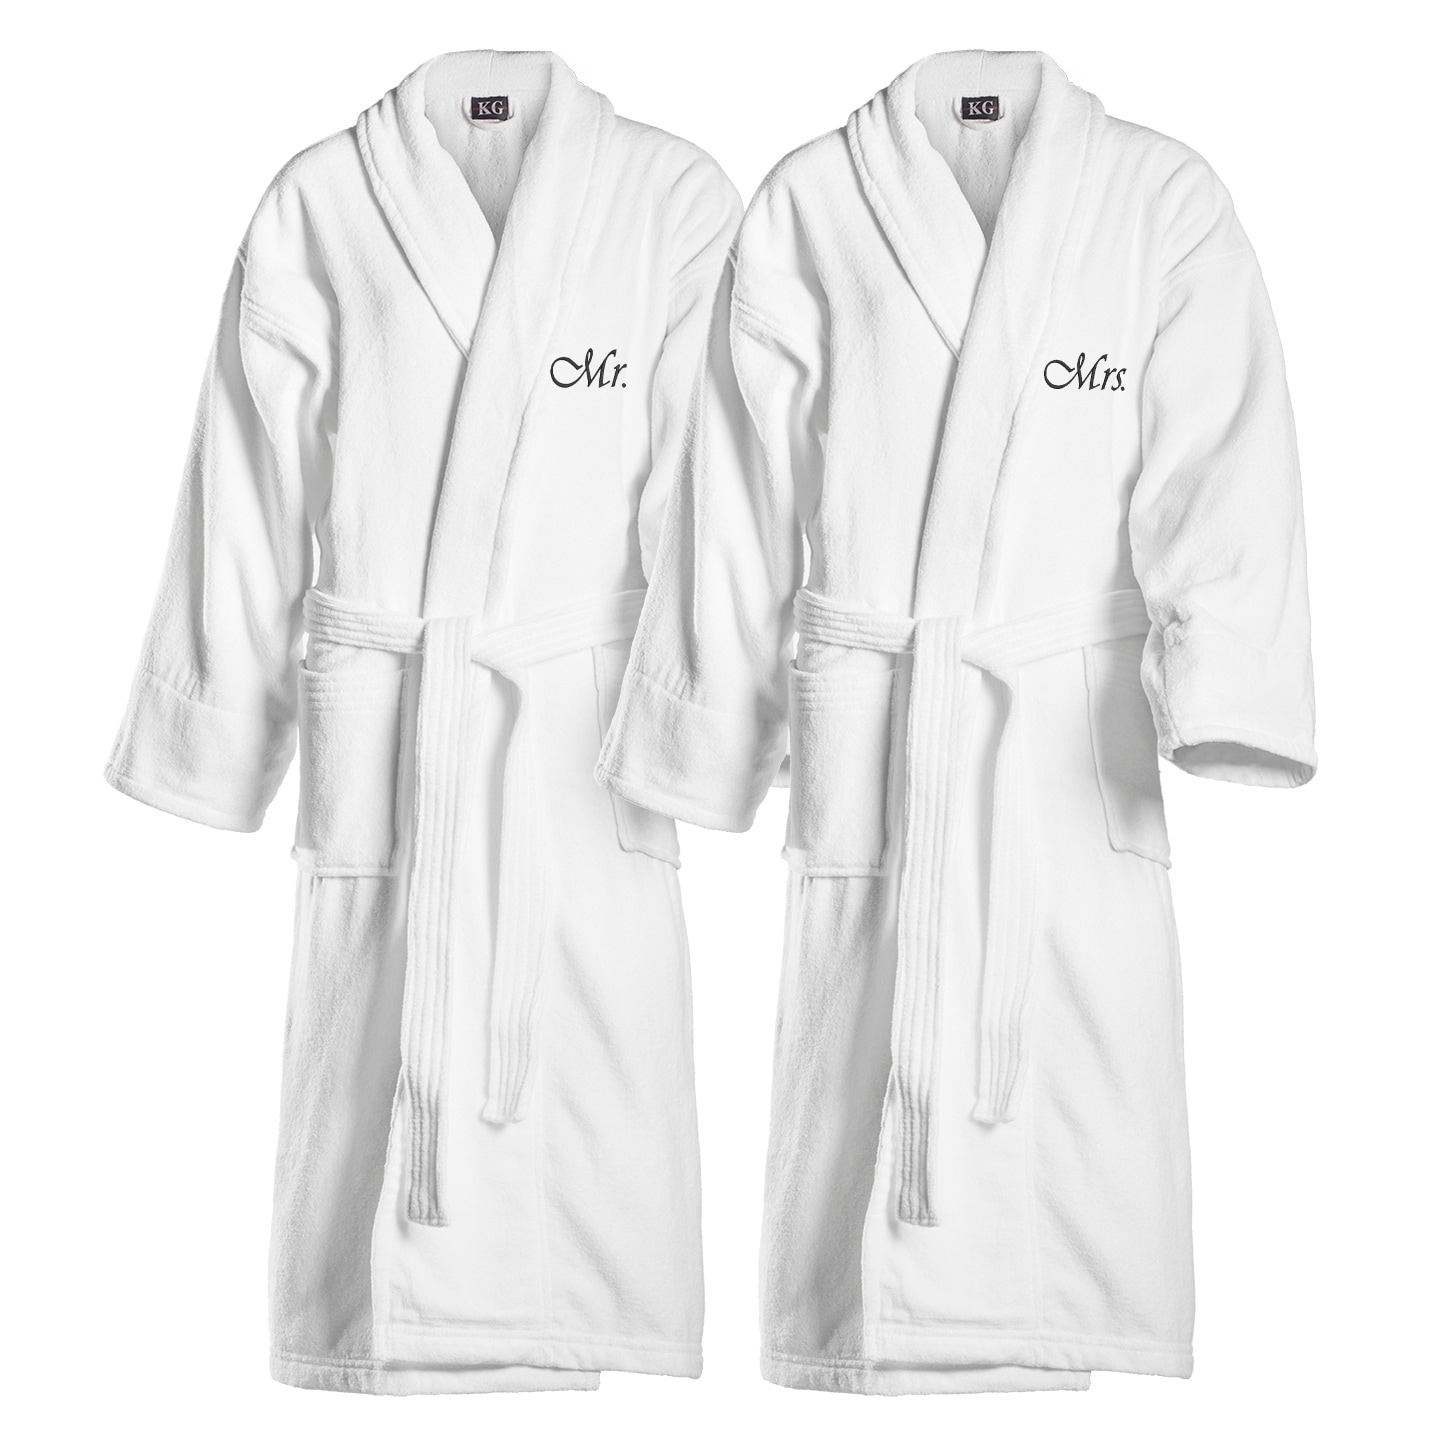 One Size Fits Most Bathrobes - Bed Bath & Beyond